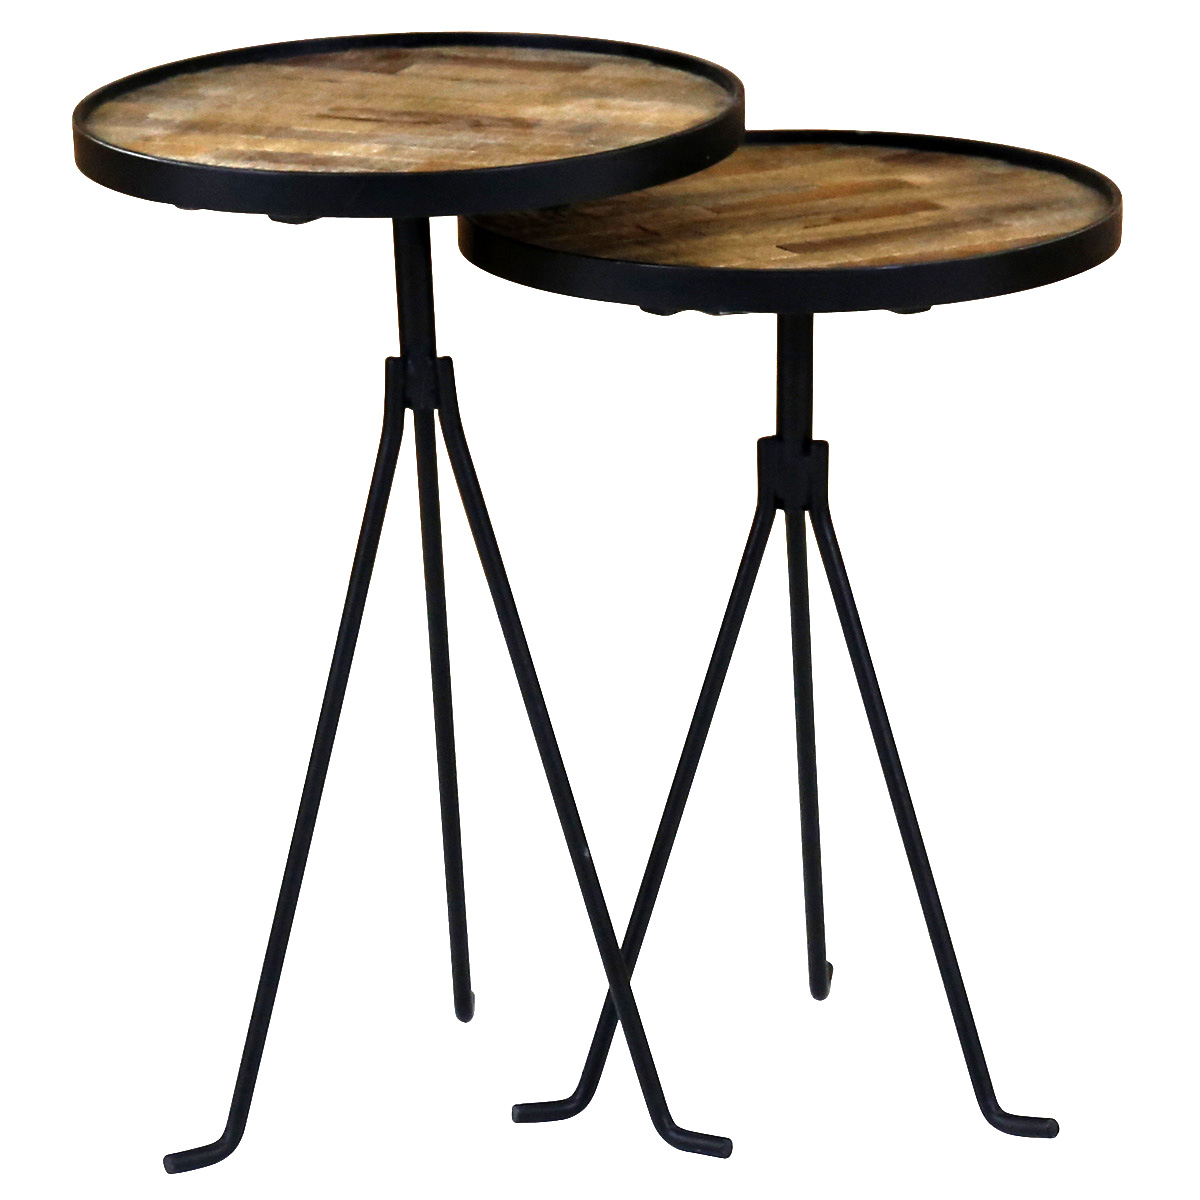 2x tables d'appoint gigognes rondes